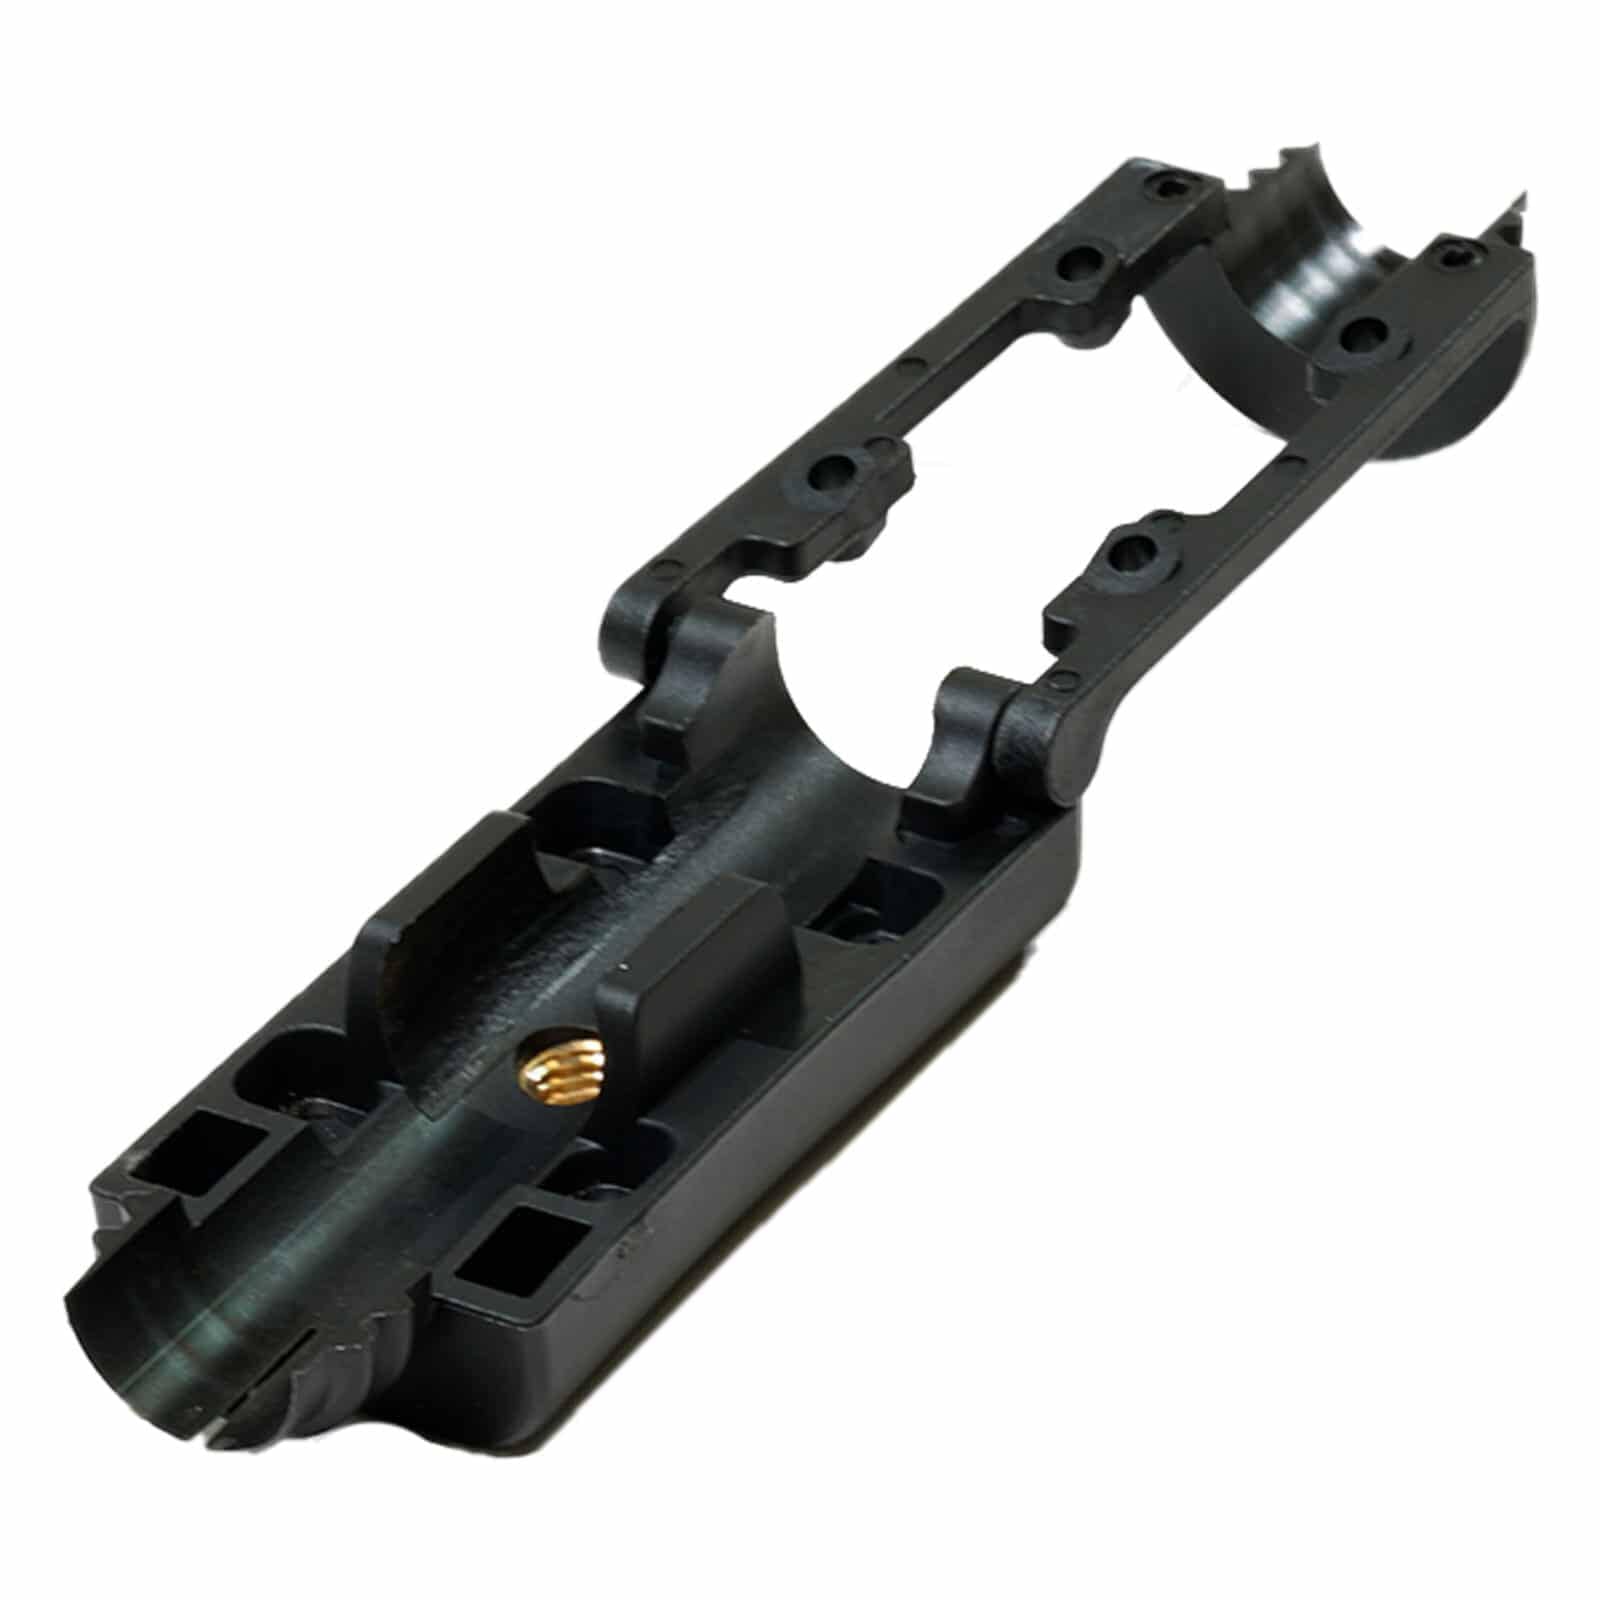 Disassembled picture of folding handle control box adapter for minelab equinox metal detector open position